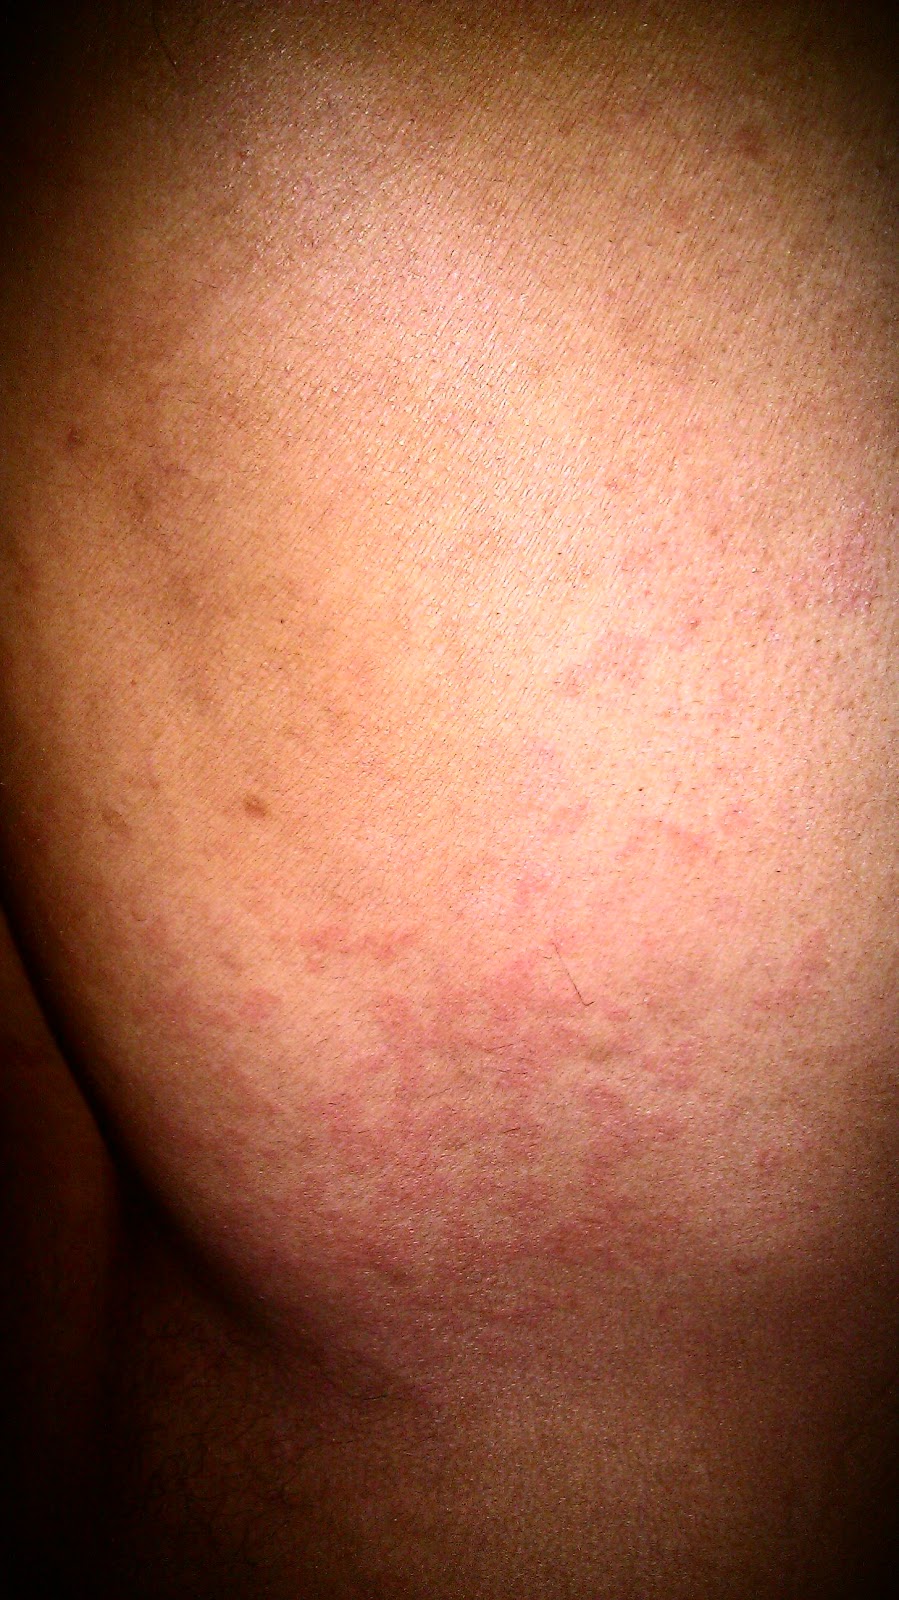 Look like bed does what tanning rash Contact dermatitis